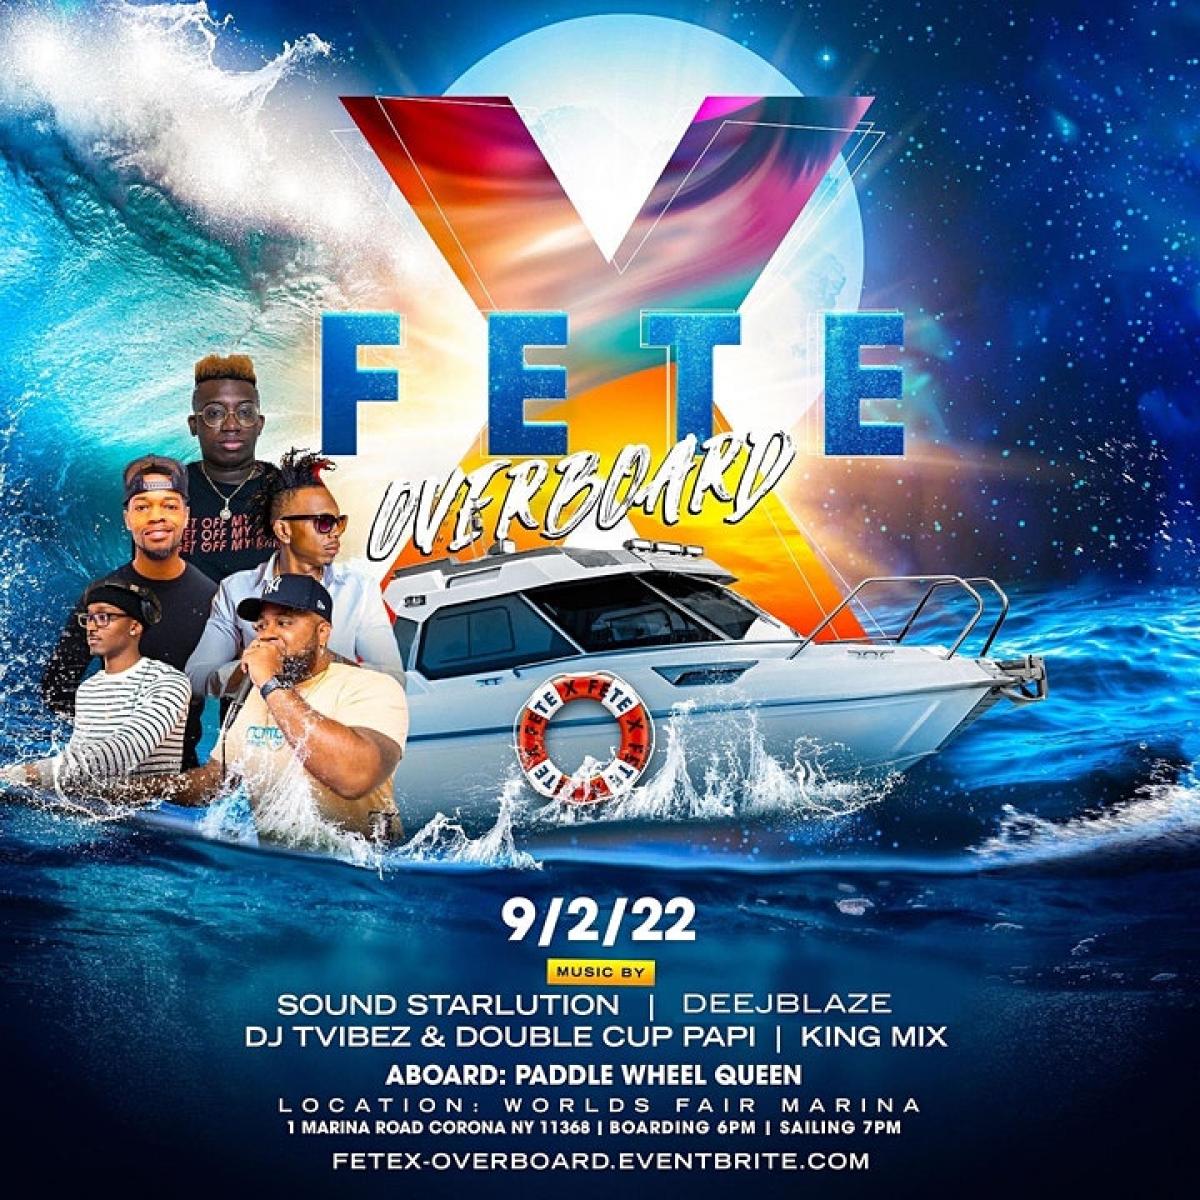 Fete❌ Overboard ⚓️ flyer or graphic.